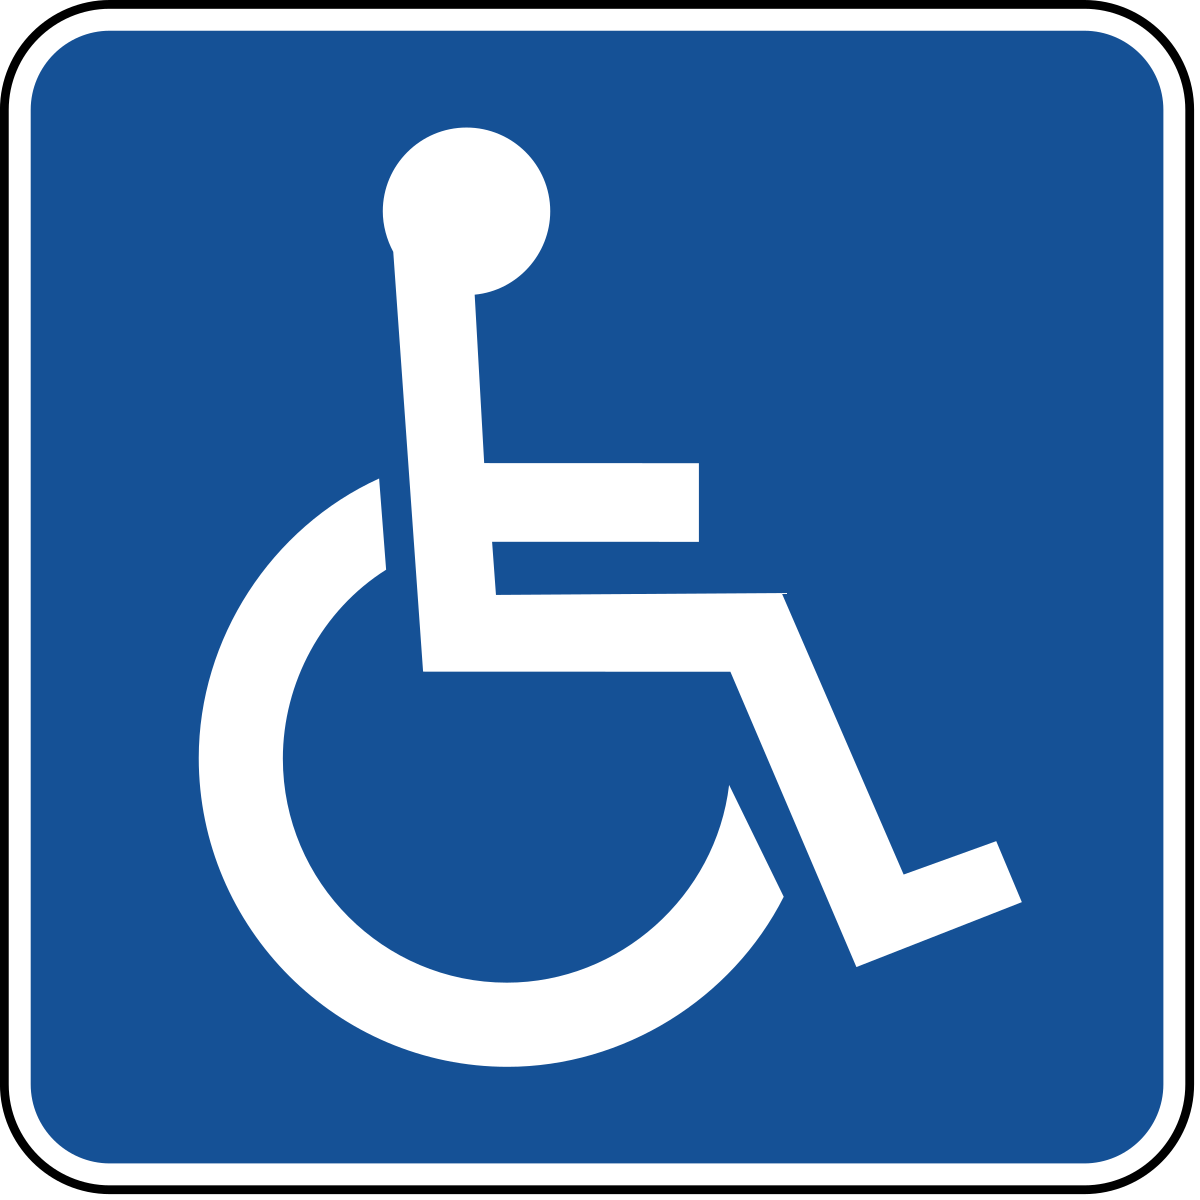 Is a fully accessible restaurant